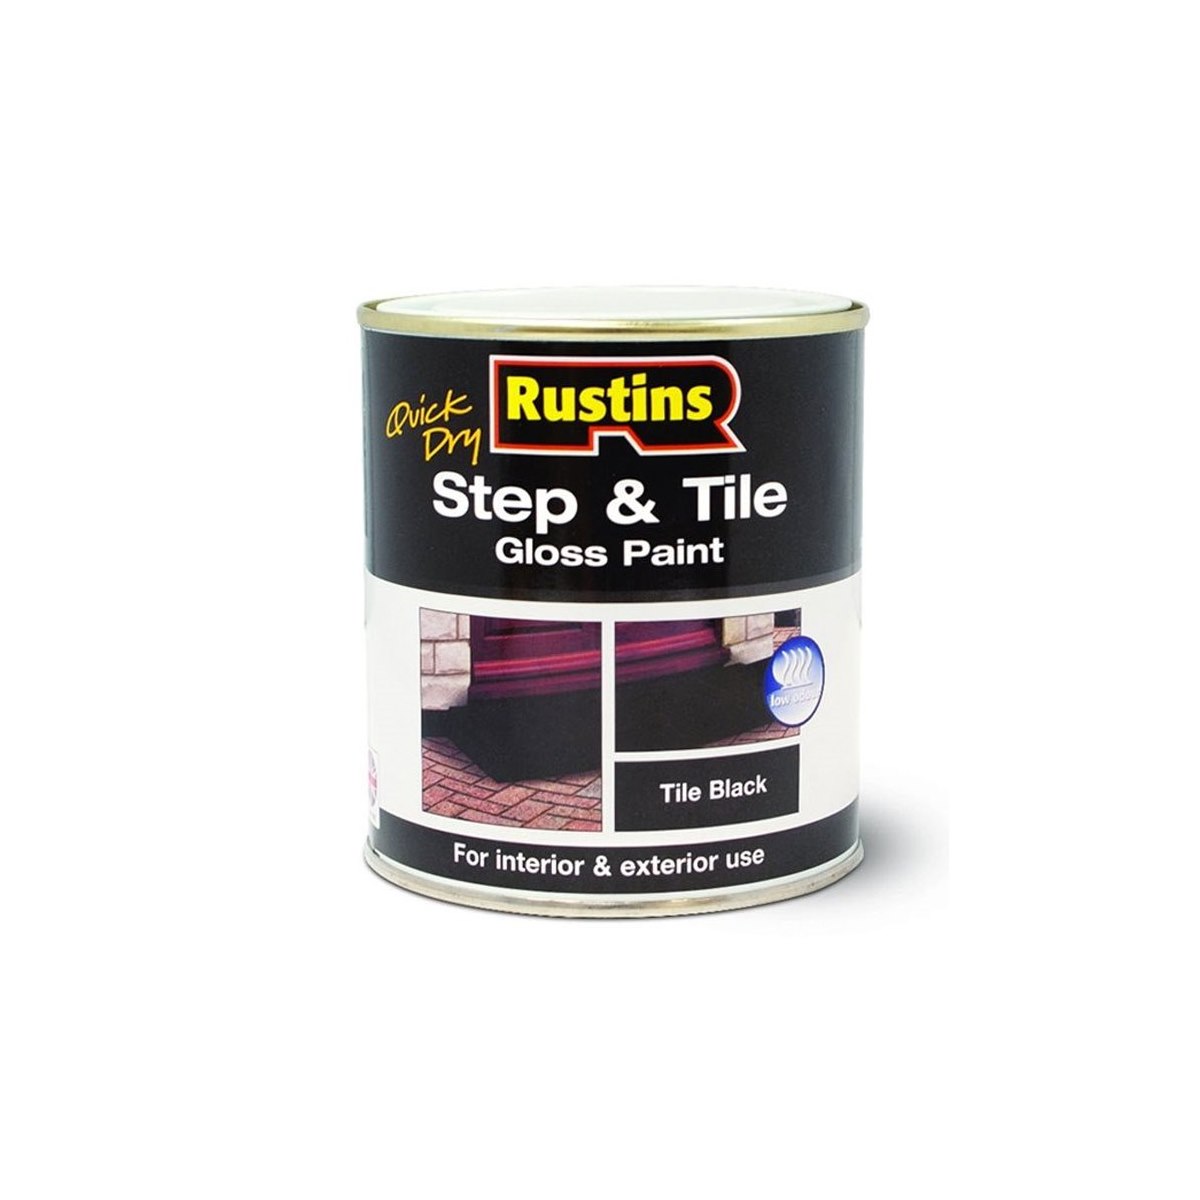 Rustins Quick Dry Step and Tile Gloss Paint Black 1 Litre